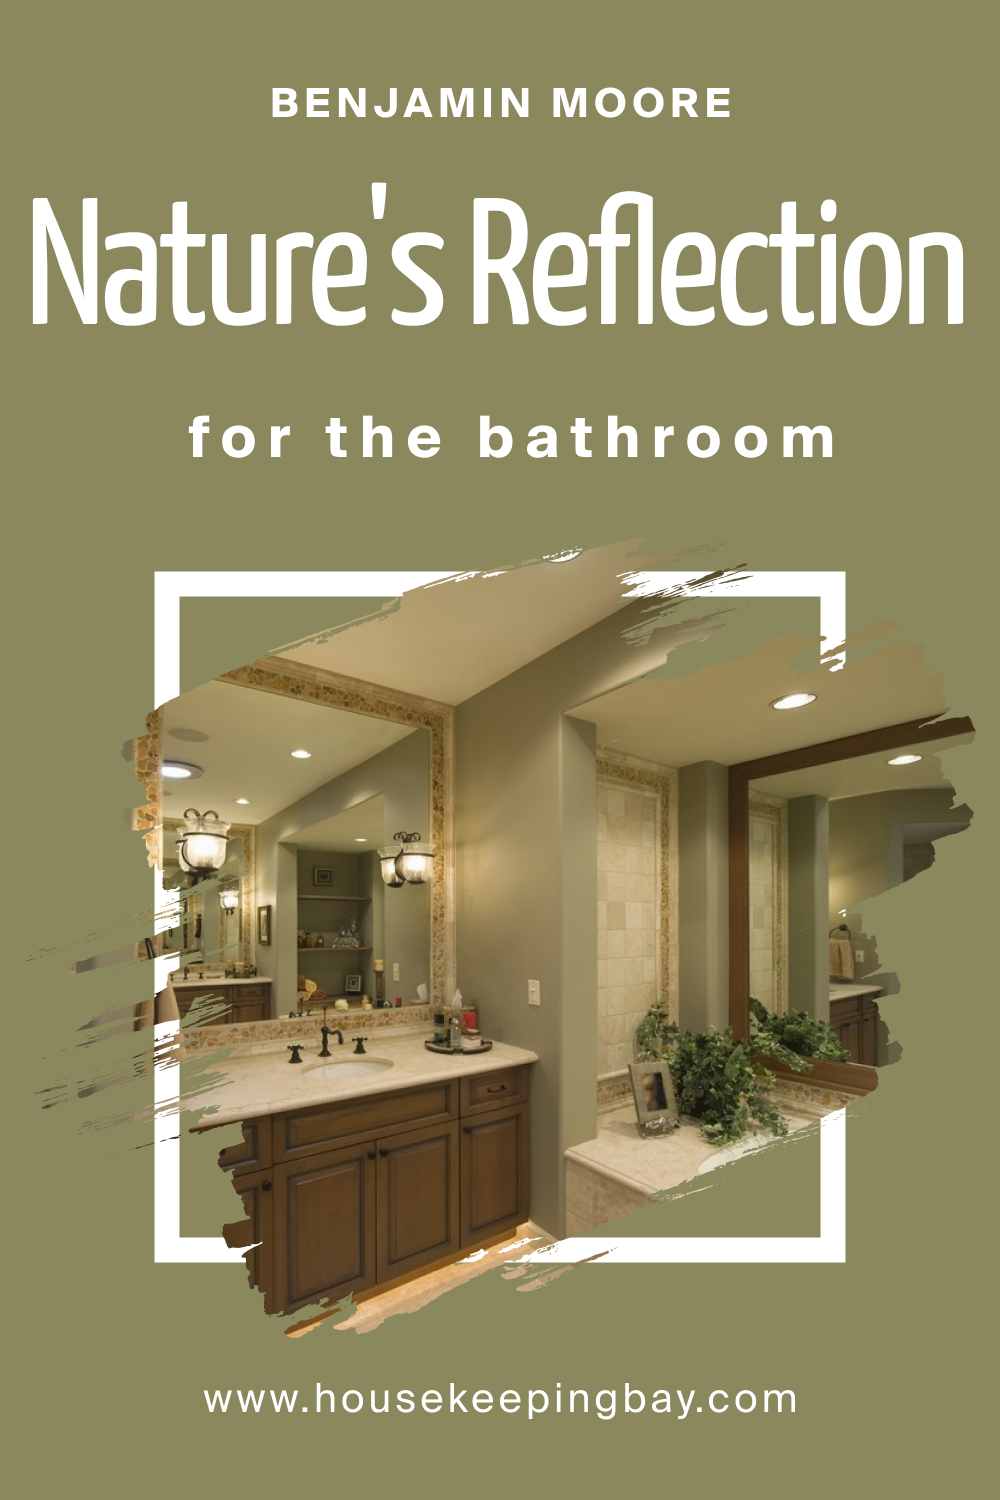 How to Use BM Nature's Reflection 504 in the Bathroom?